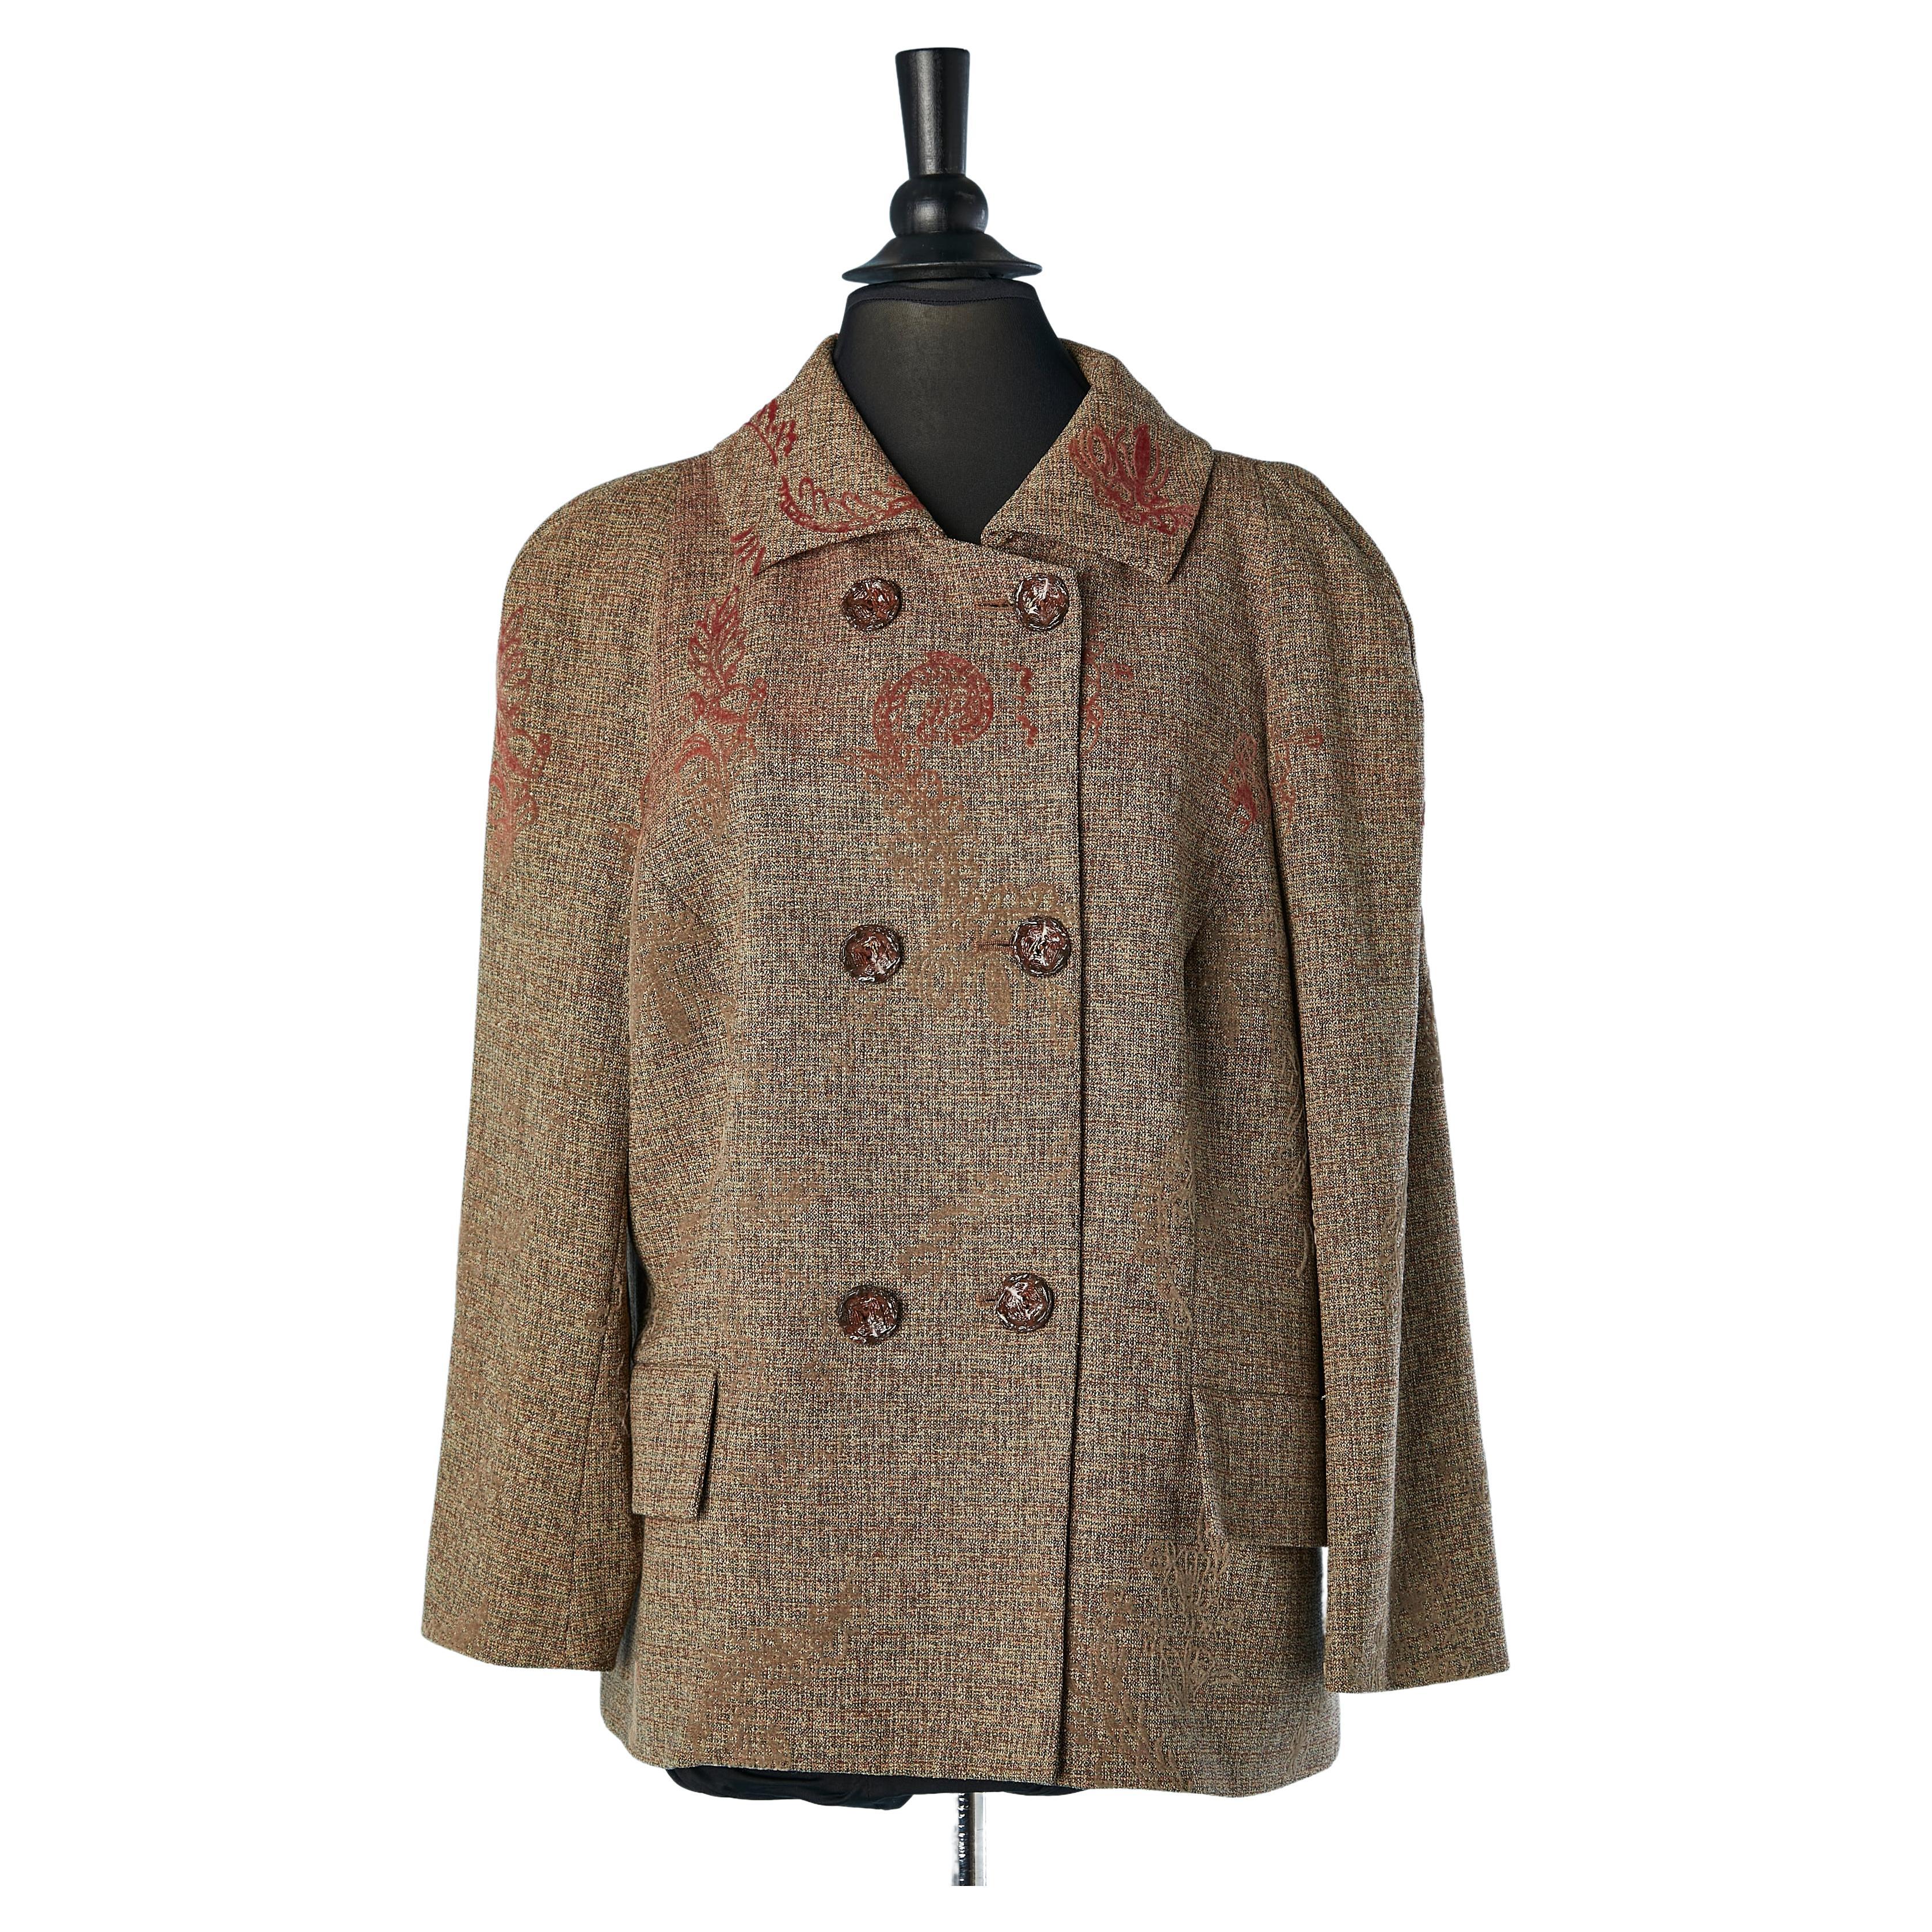 Thin tweed wool double breasted jacket with felt pattern Christian Lacroix 